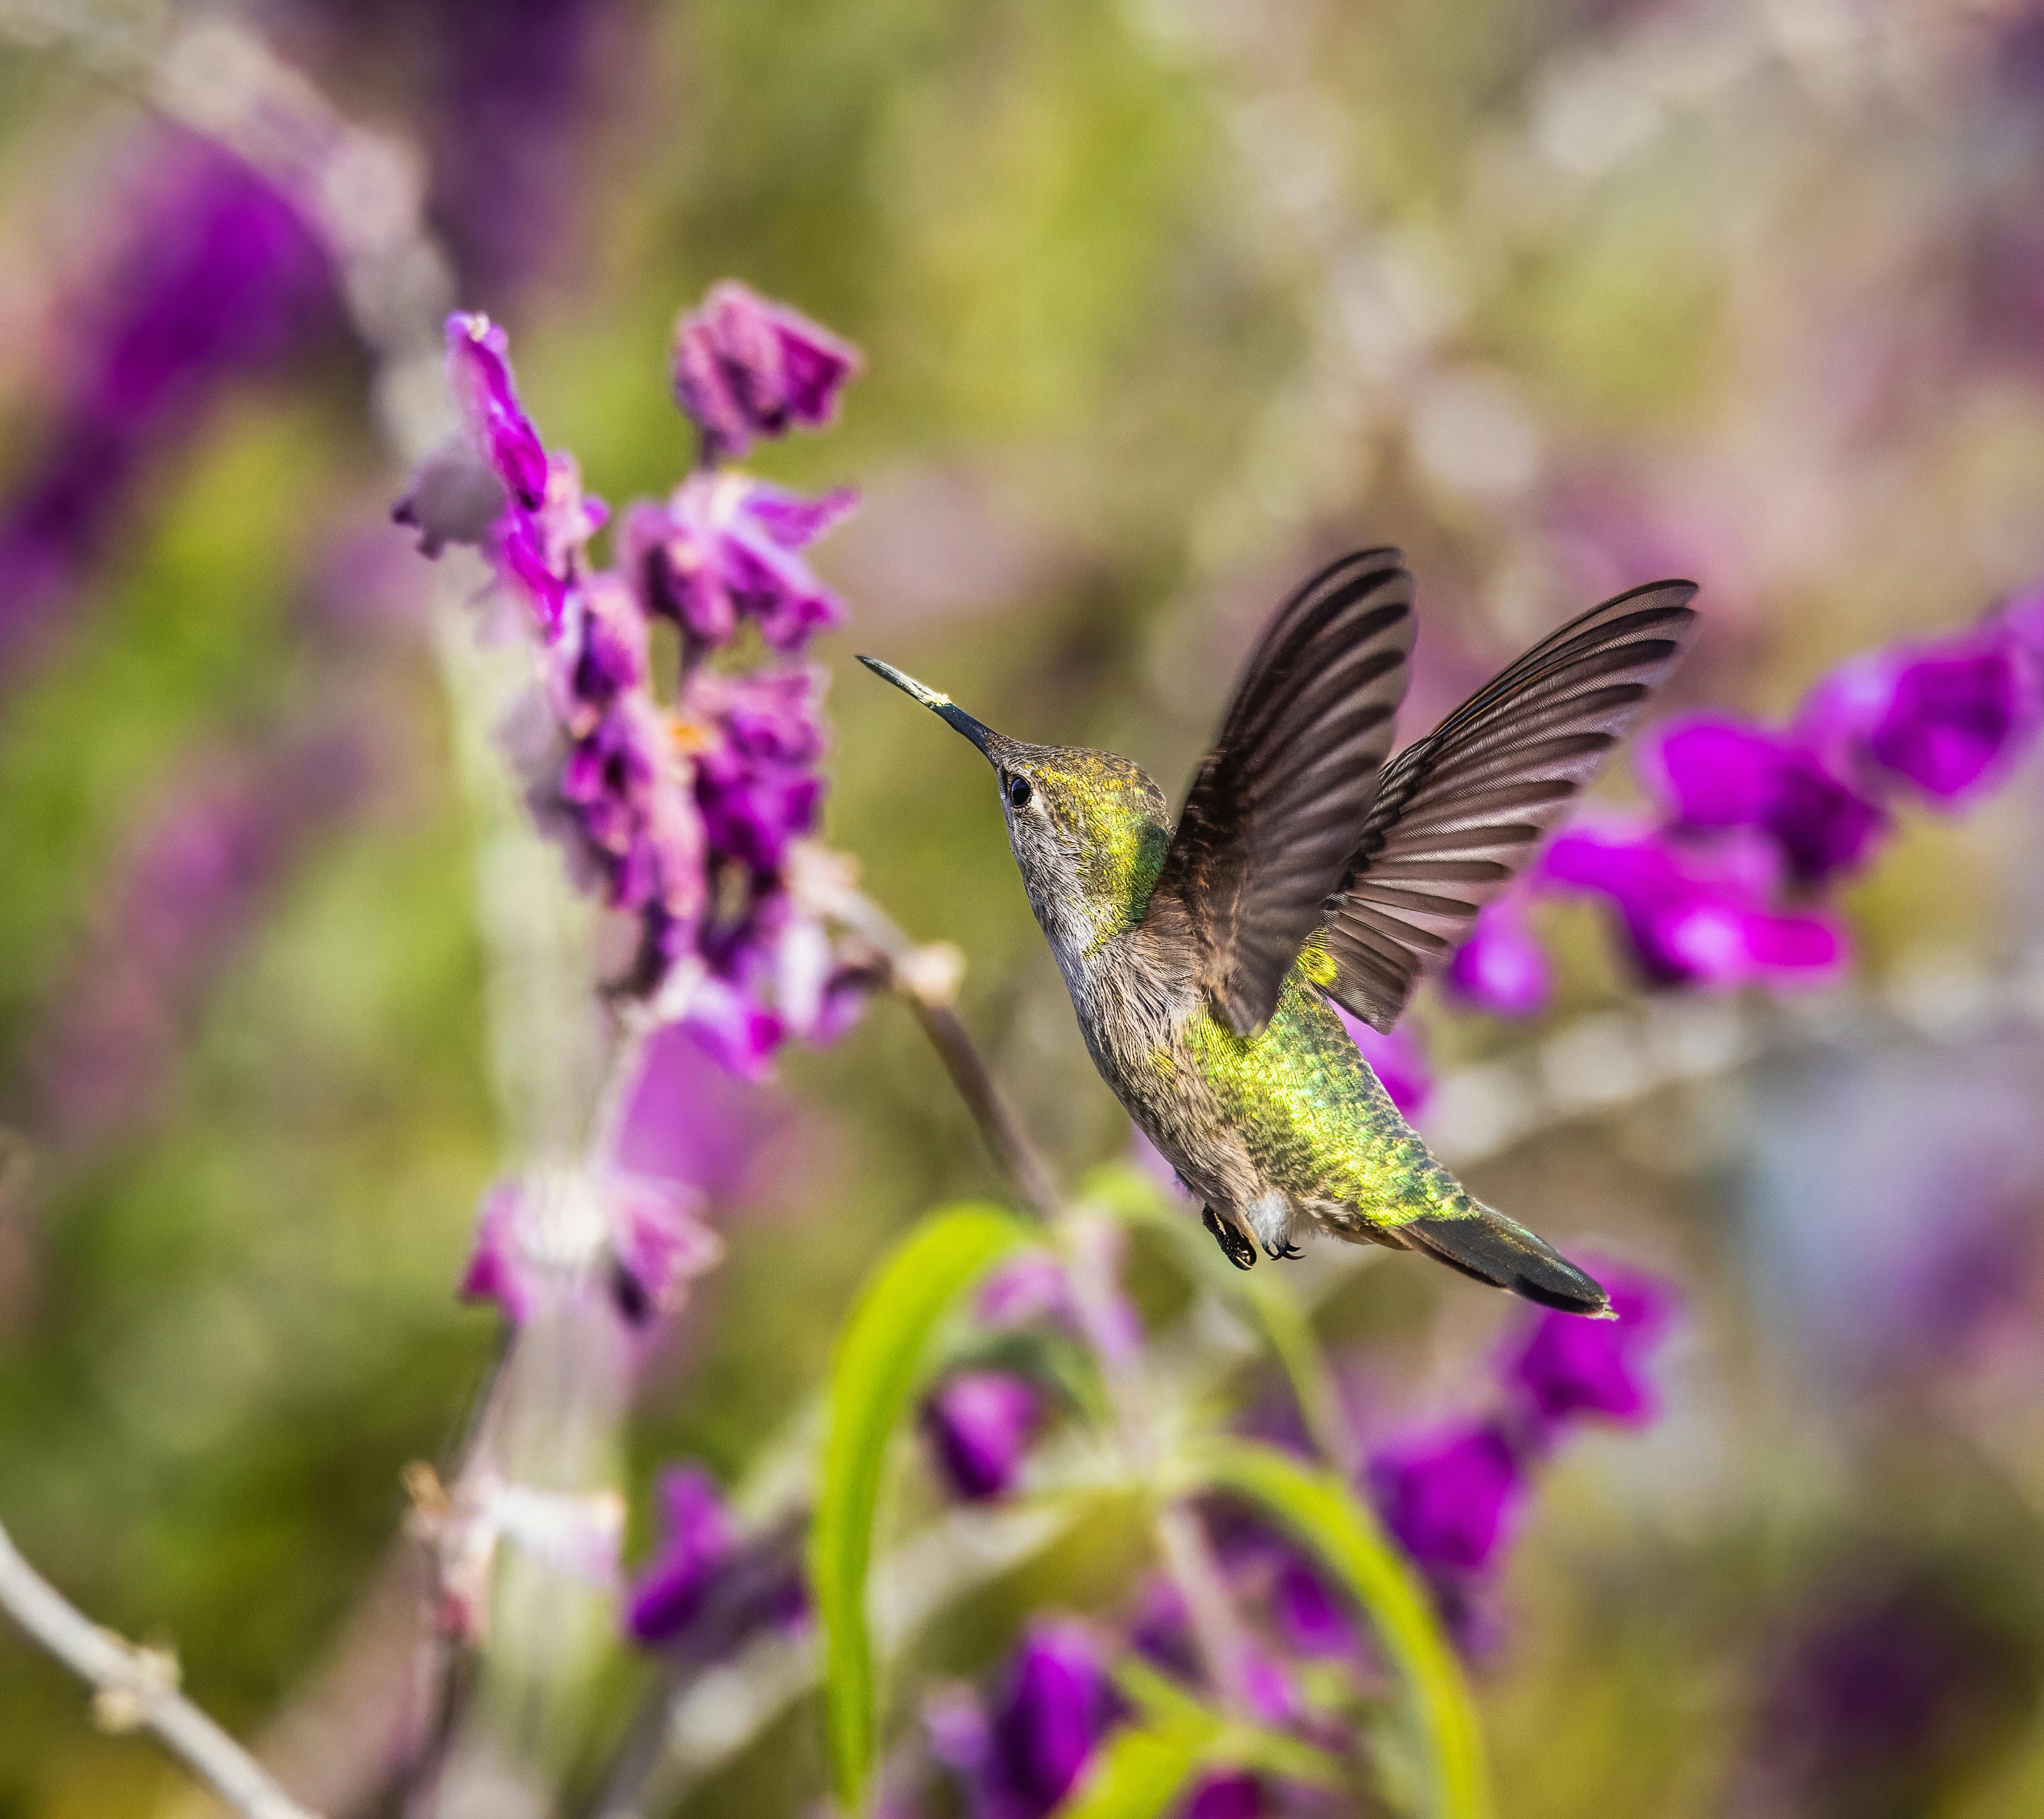 Close-up of a Hummingbird Flying near a Purple Flower · Free Stock Photo